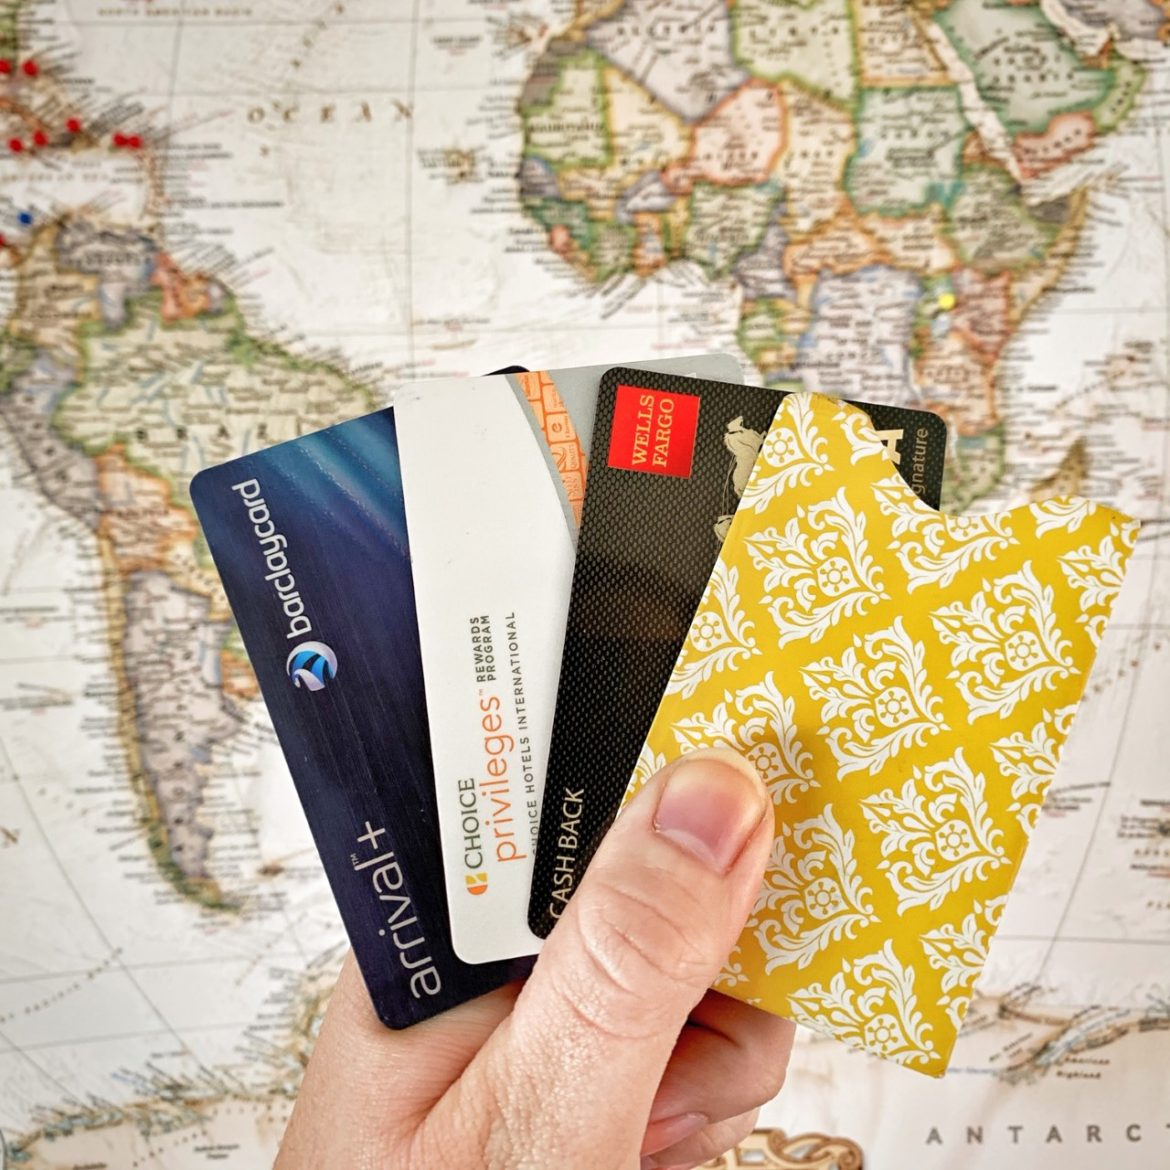 are travel credit cards hard to get